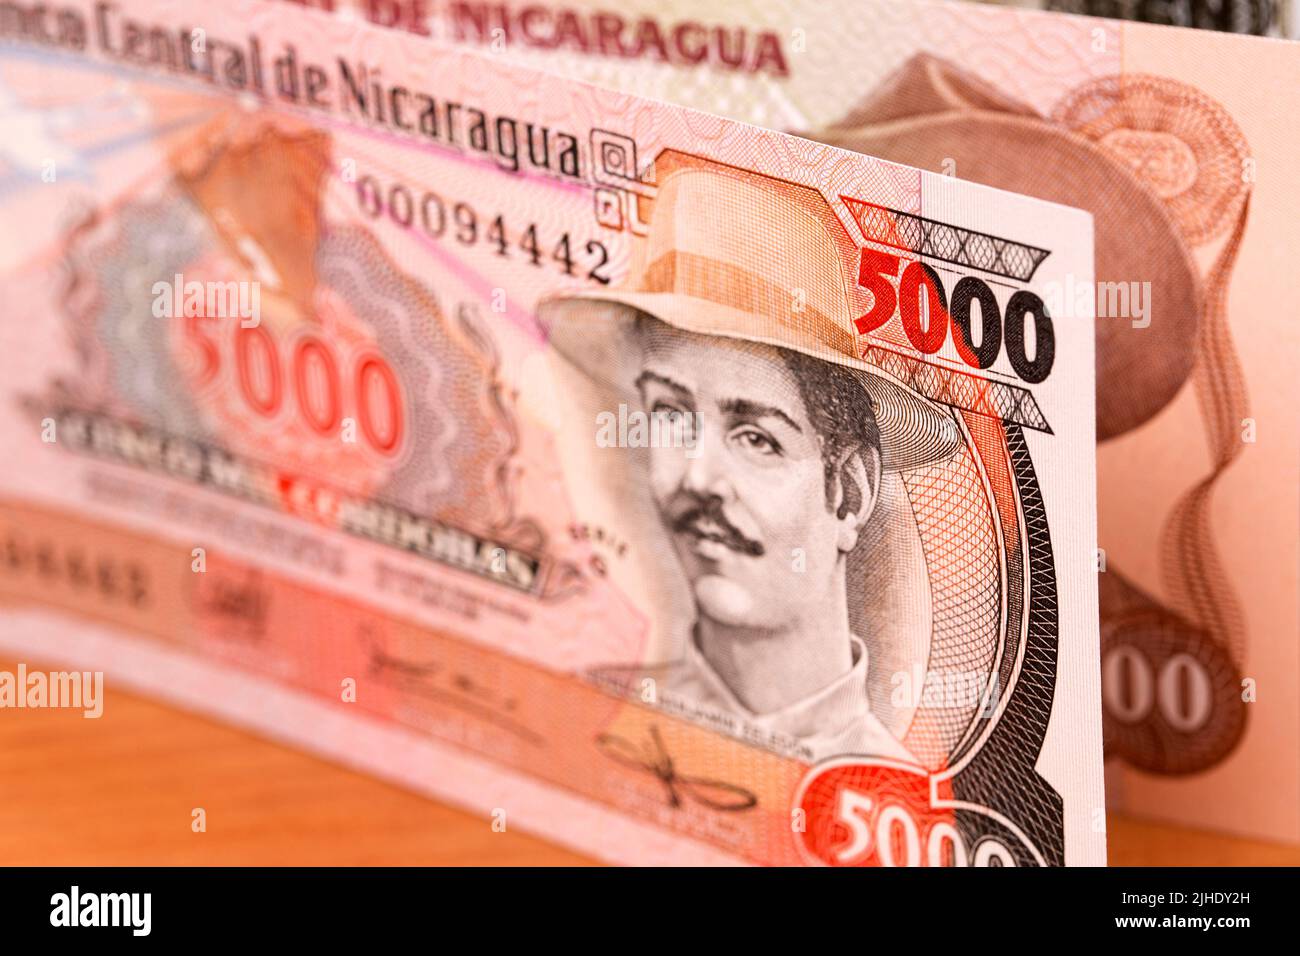 Old Nicaraguan money - Cordoba a business background Stock Photo